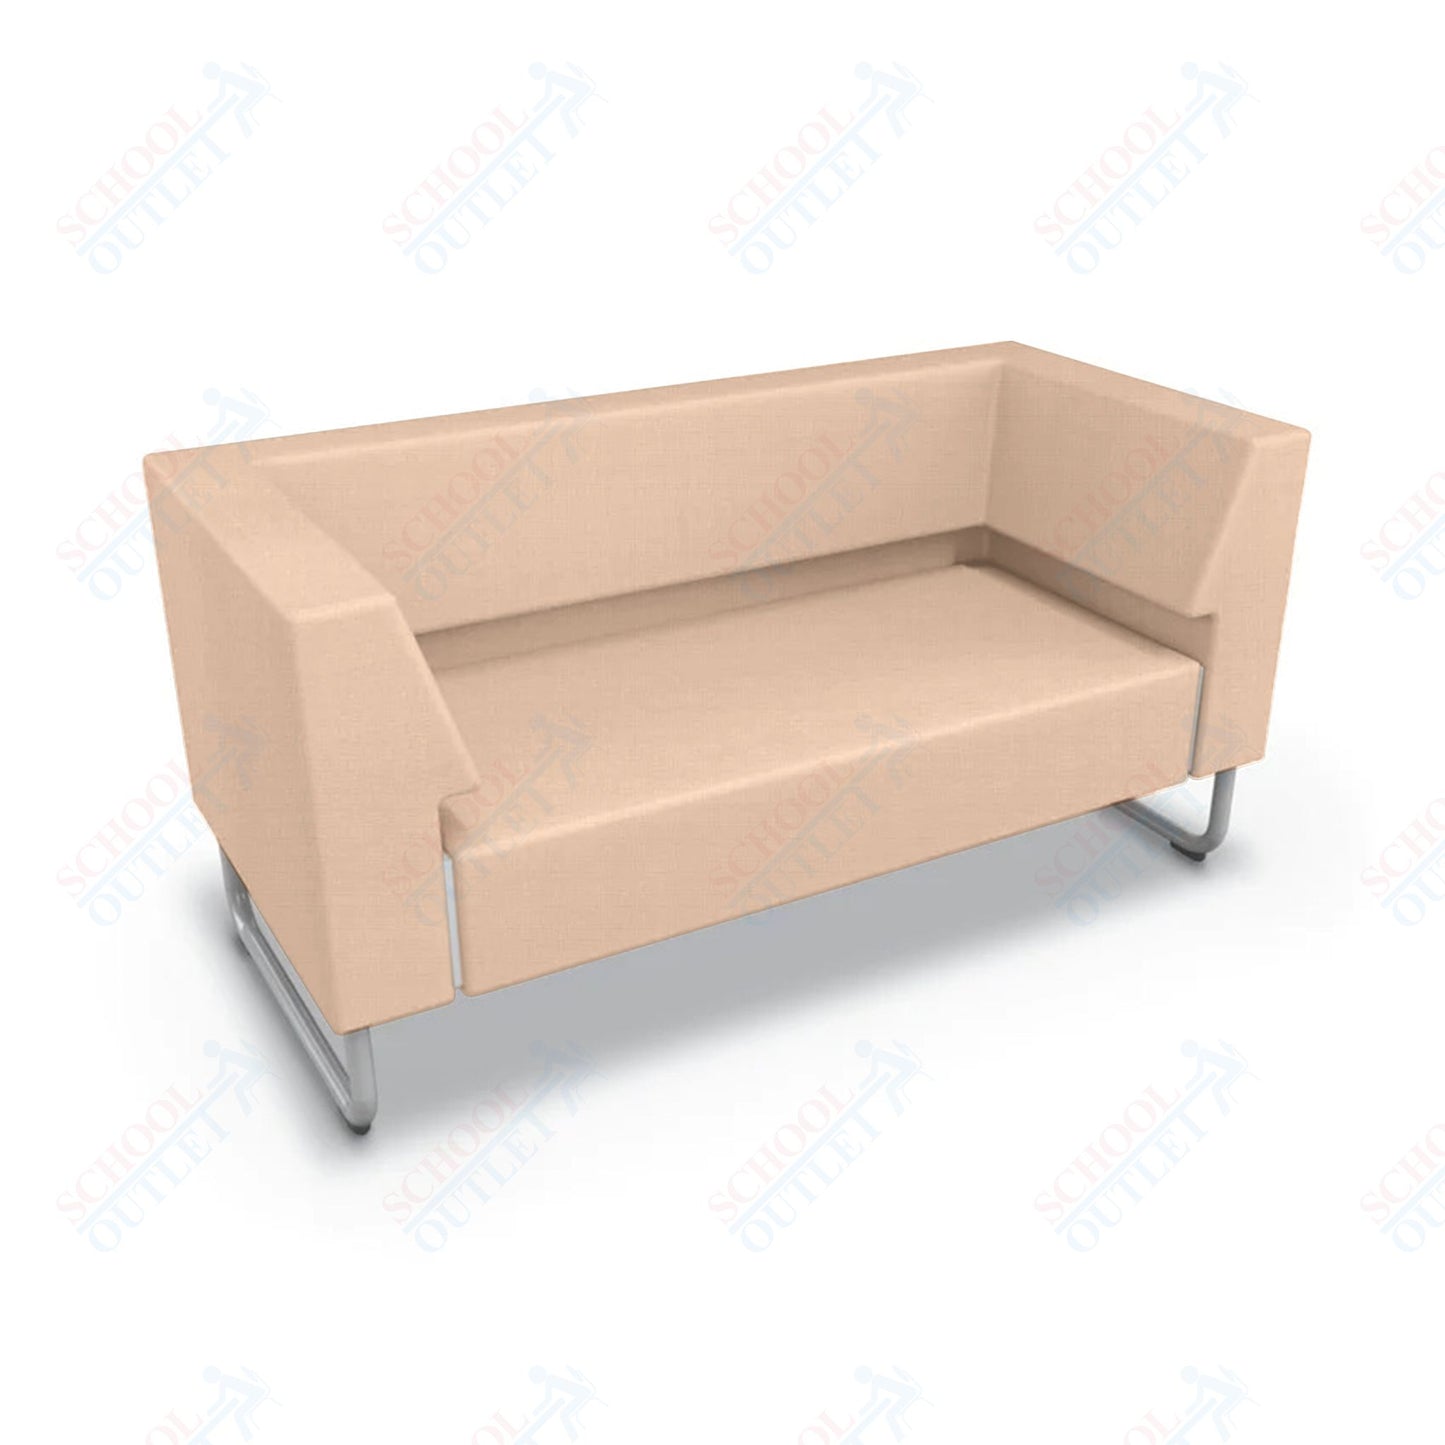 Mooreco Akt Soft Seating Lounge Loveseat - Both Arms - Grade 02 Fabric and Powder Coated Sled Legs